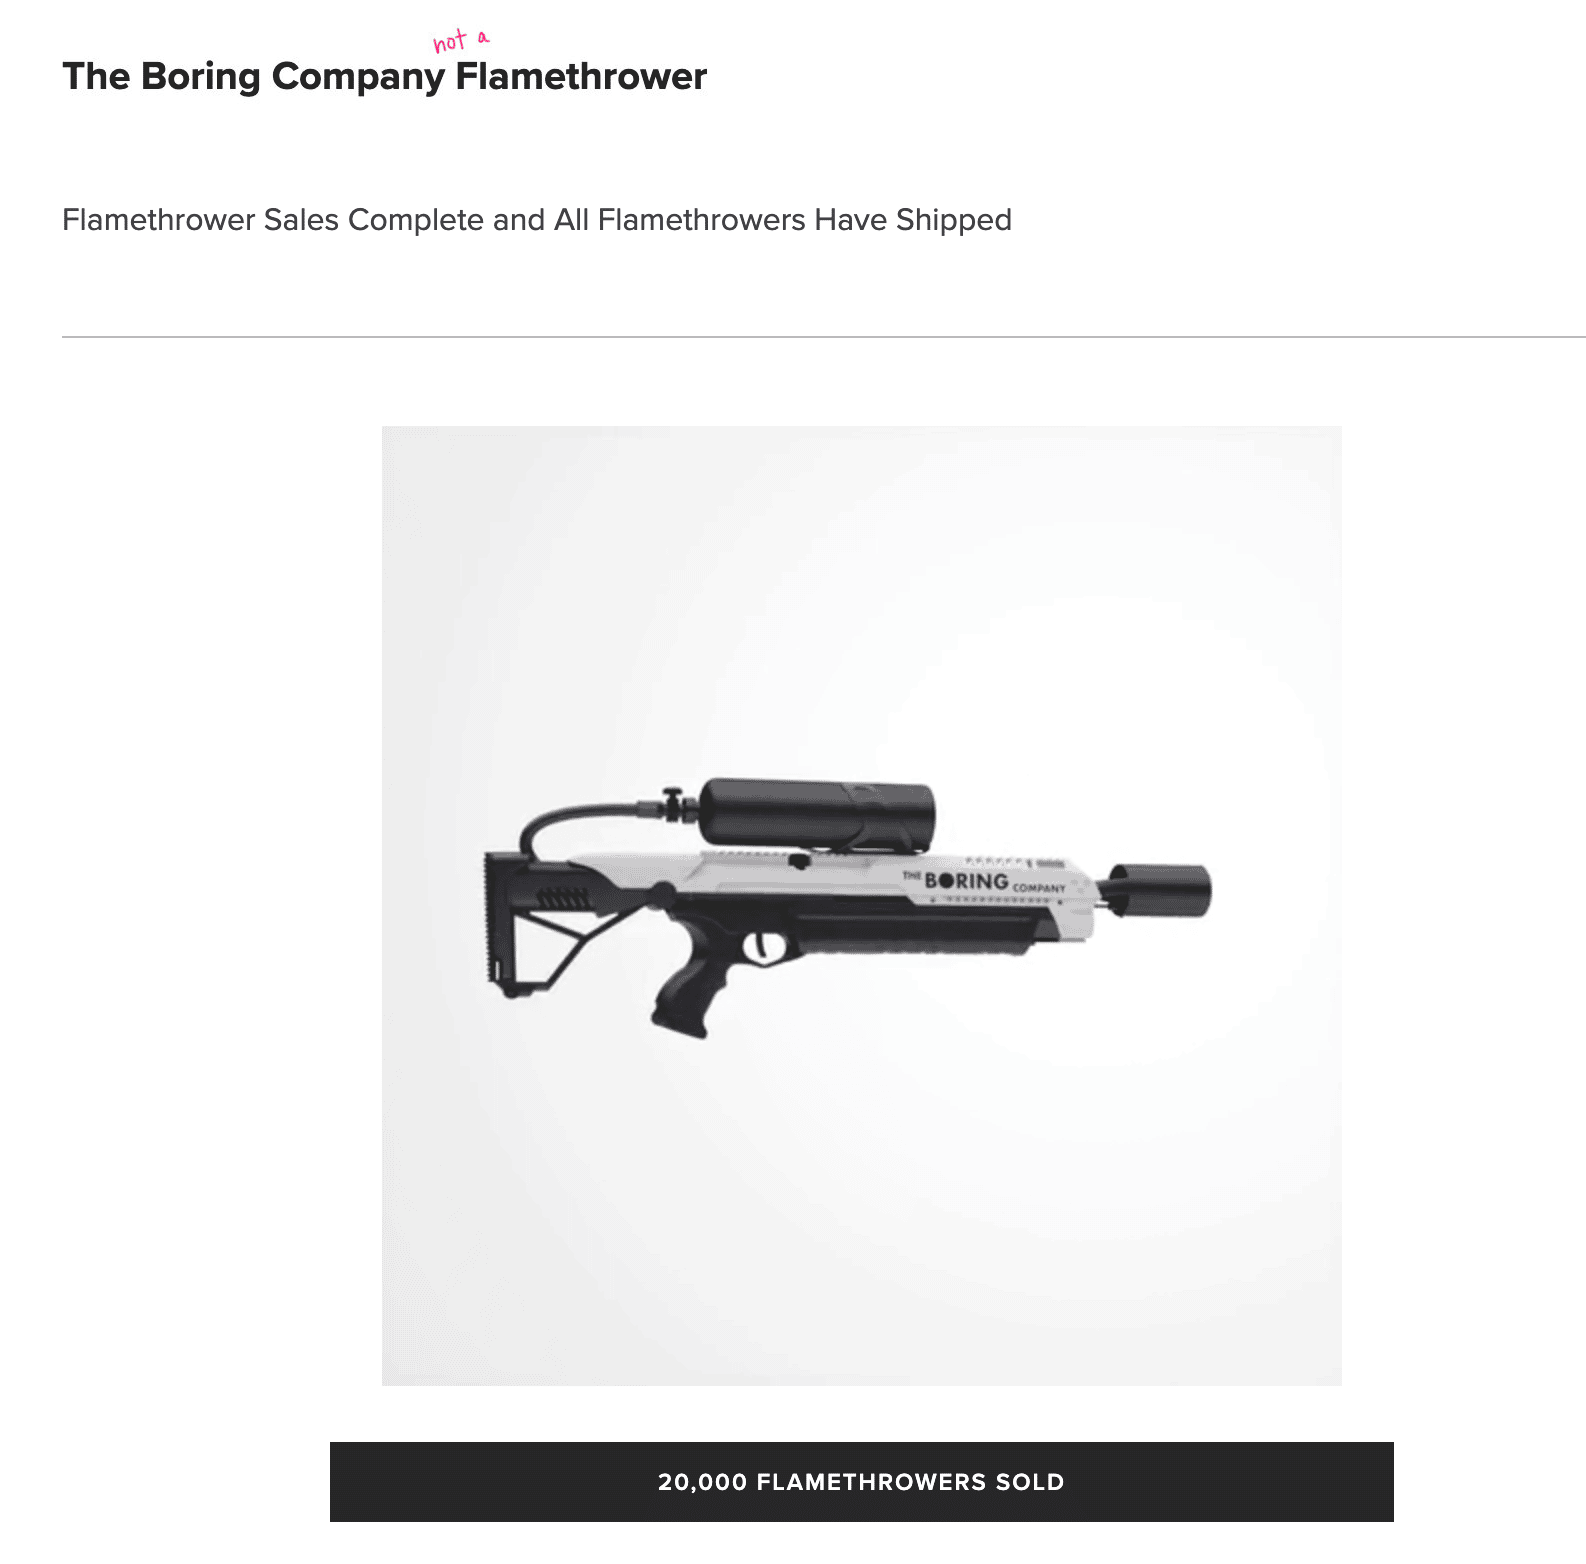 The Boring Company Not a Flamethrower